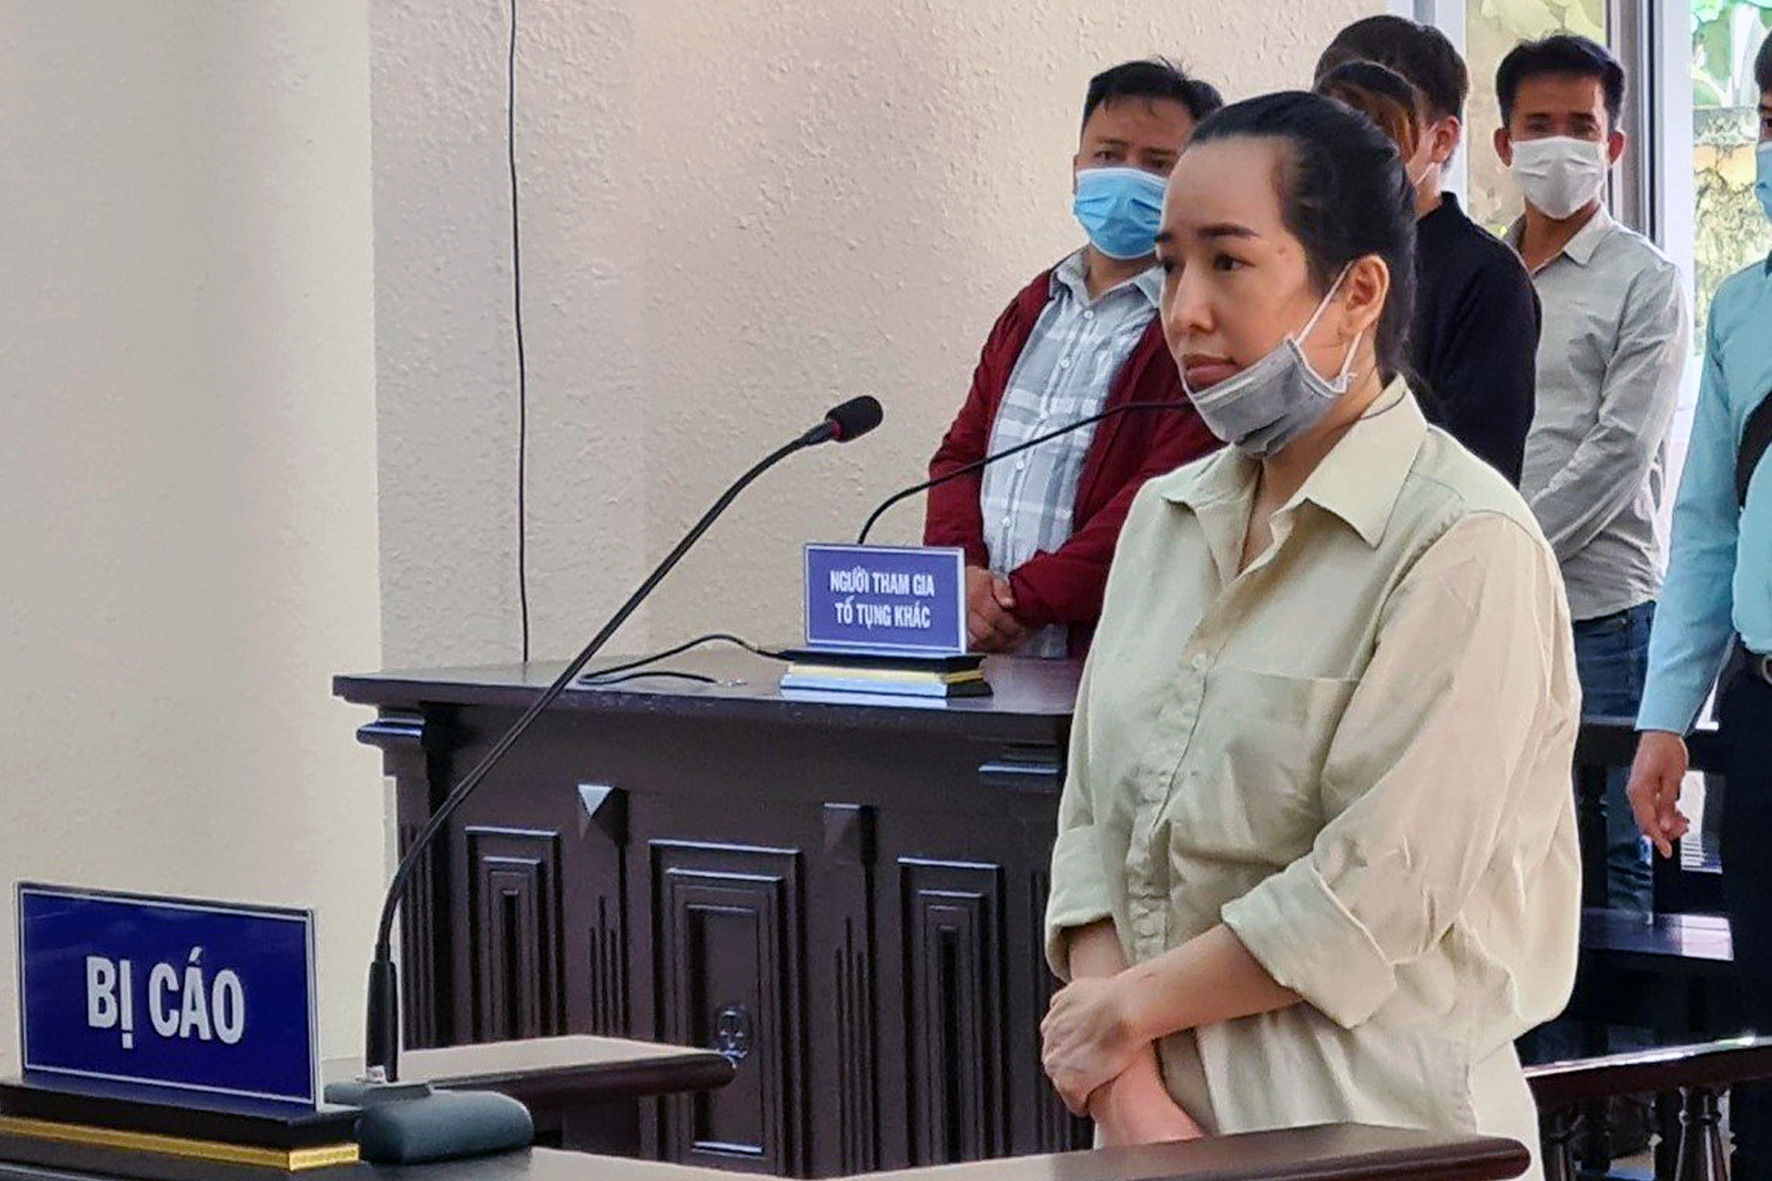 Woman jailed for life over $3.5mn fraud in southern Vietnam